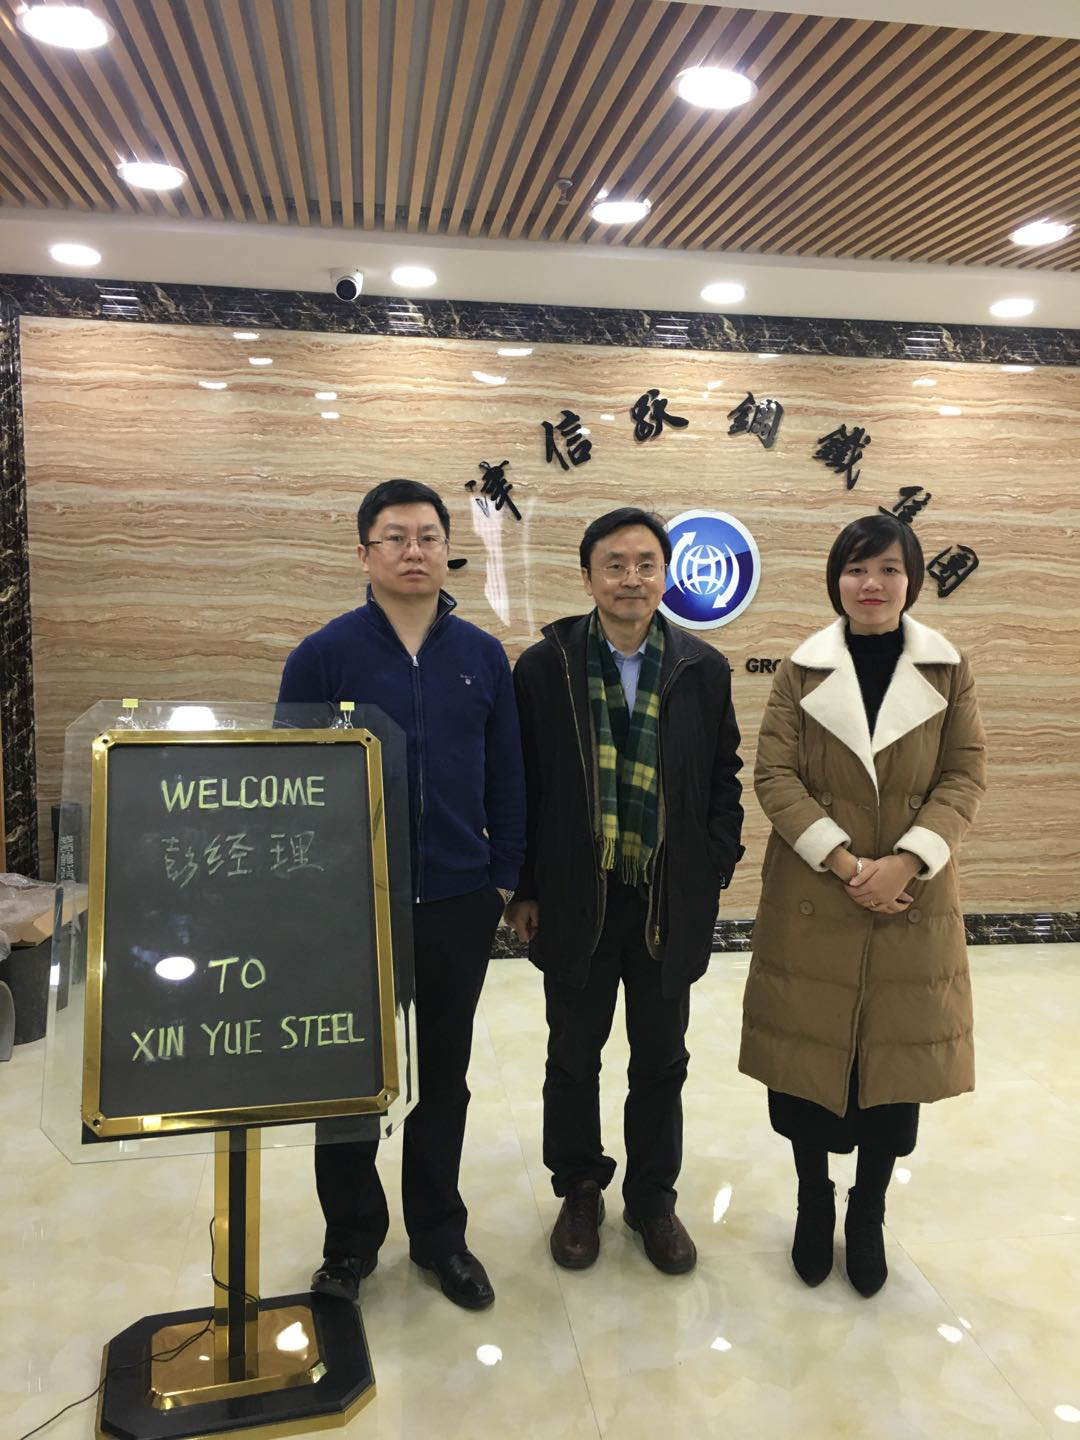 Welcome Canadian client purchaser in China to visit Xinyue